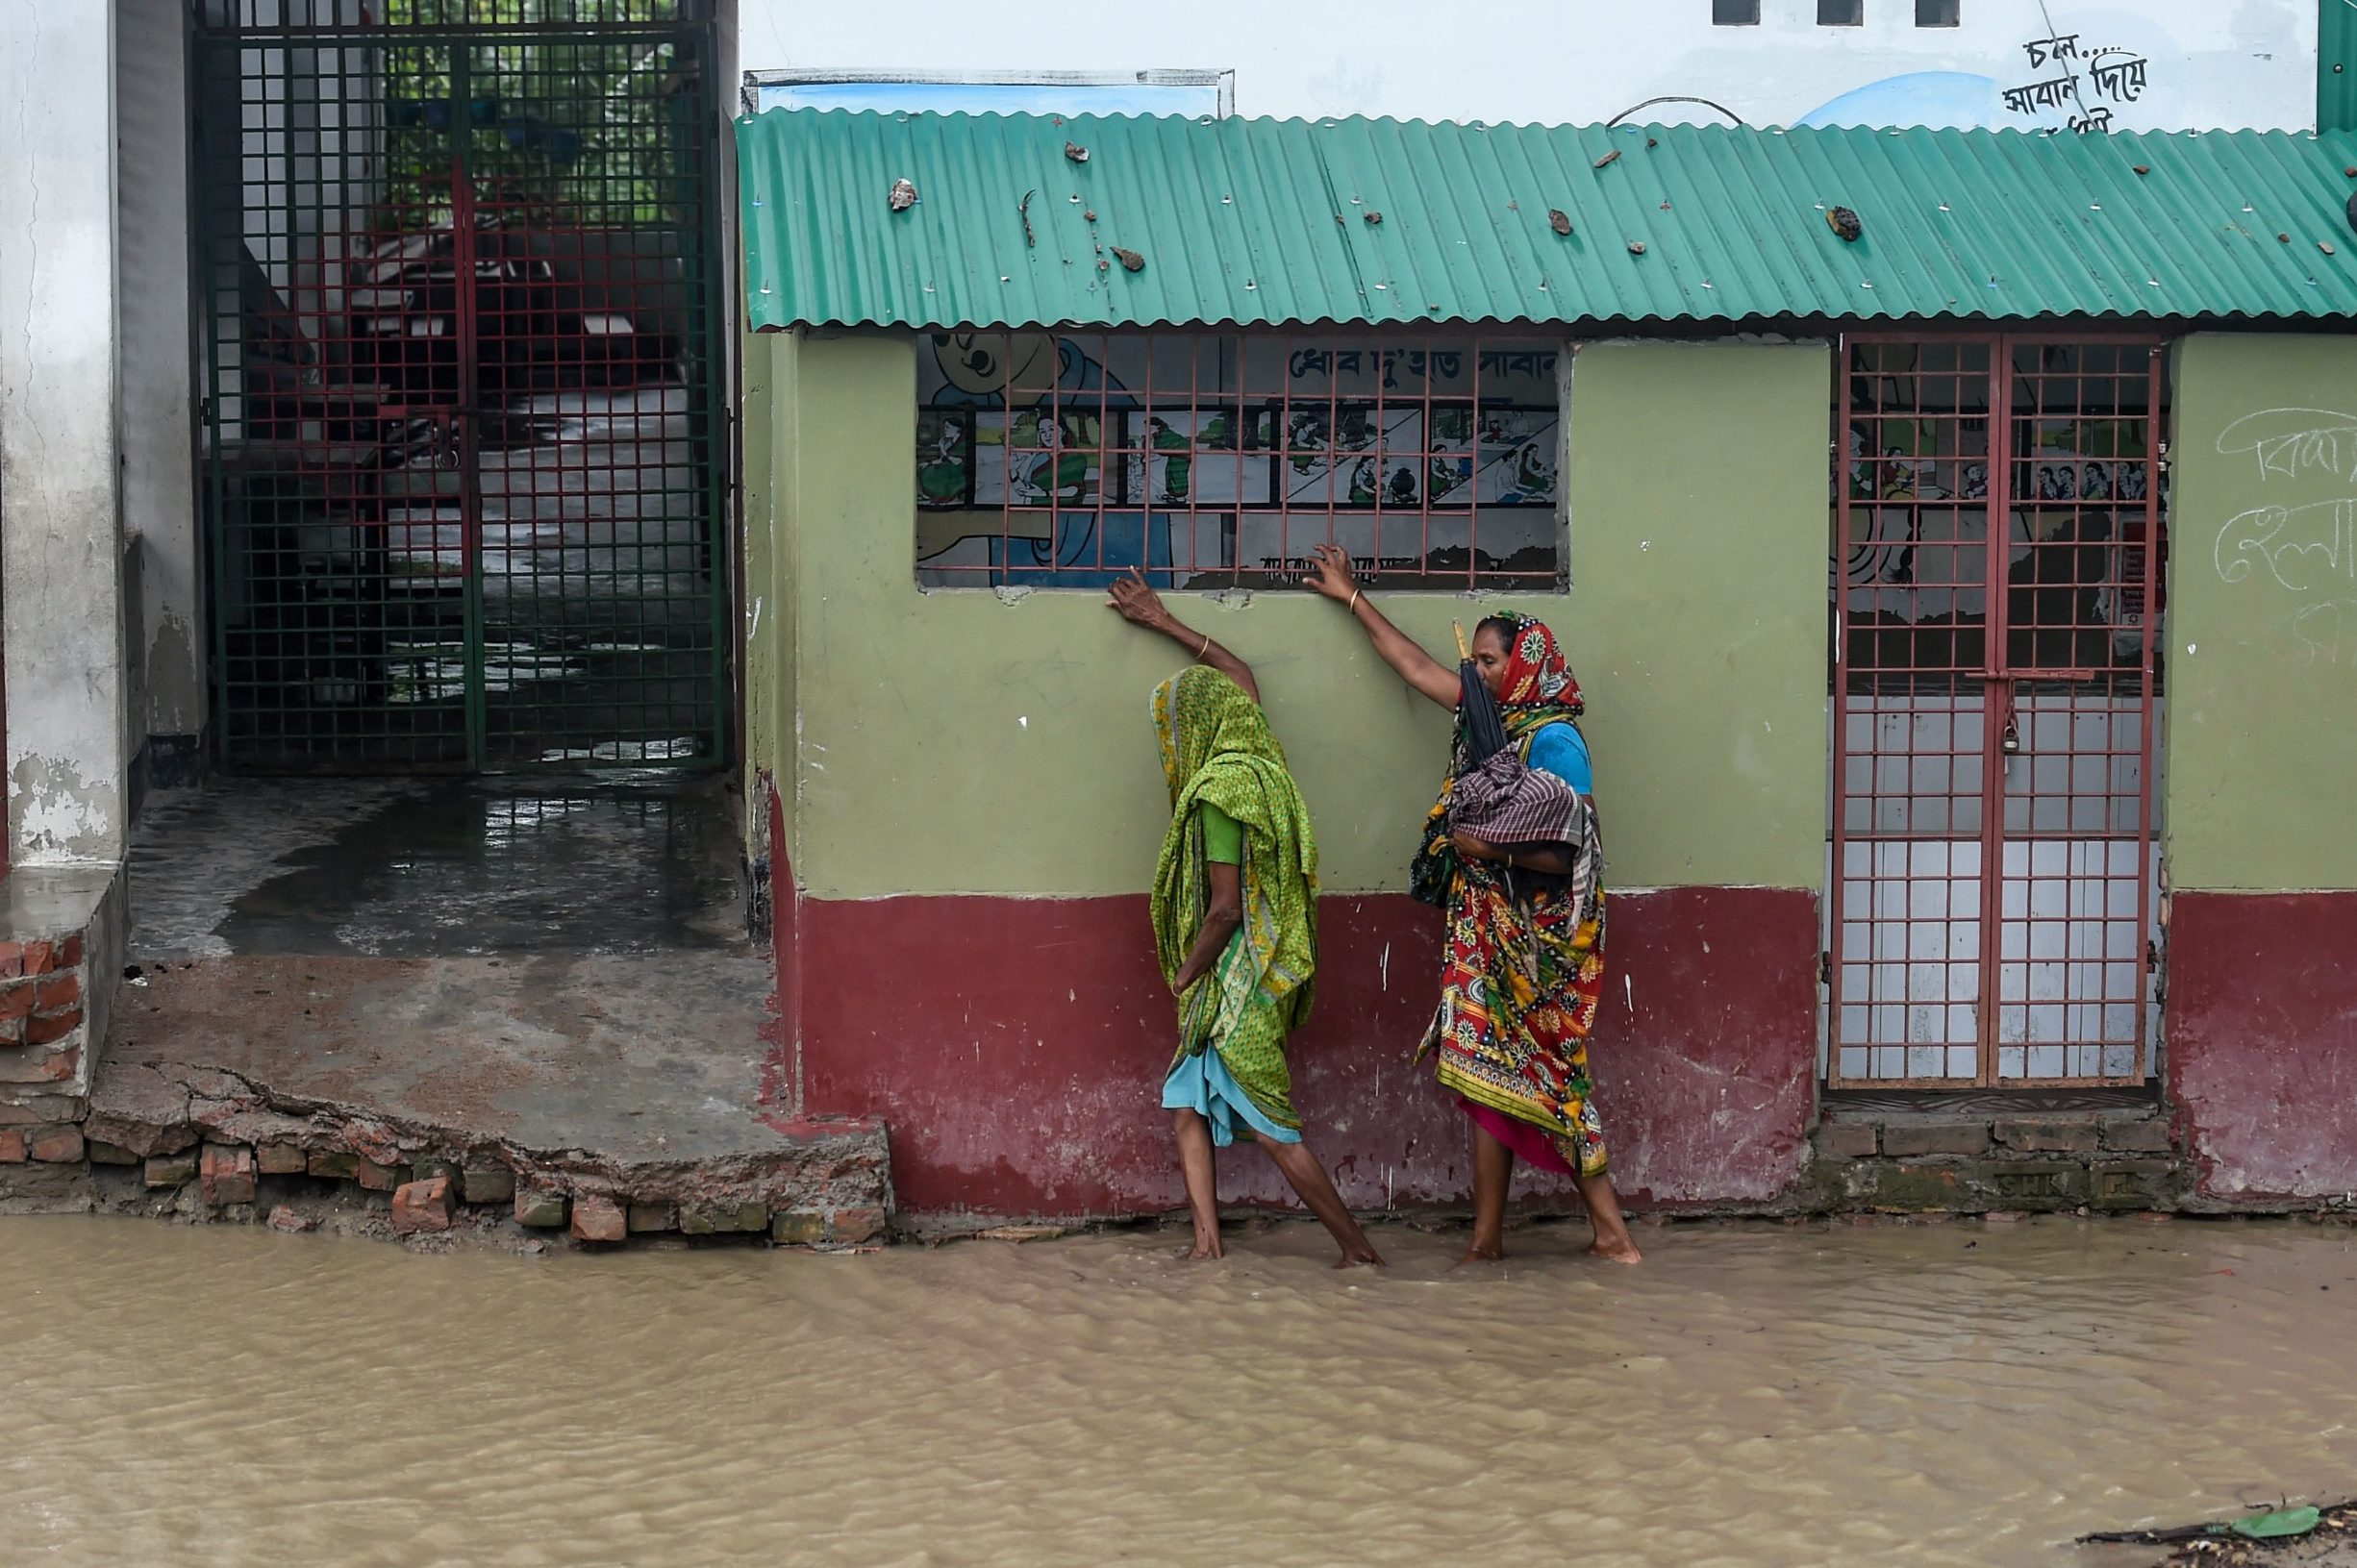 Residents walk along a house on a flooded street heading to a shelter ahead of the expected landfall of cyclone Amphan, in Dacope of Khulna district on May 20, 2020. - Several million people were taking shelter and praying for the best on Wednesday as the Bay of Bengal's fiercest cyclone in decades roared towards Bangladesh and eastern India, with forecasts of a potentially devastating and deadly storm surge. Authorities have scrambled to evacuate low lying areas in the path of Amphan, which is only the second 